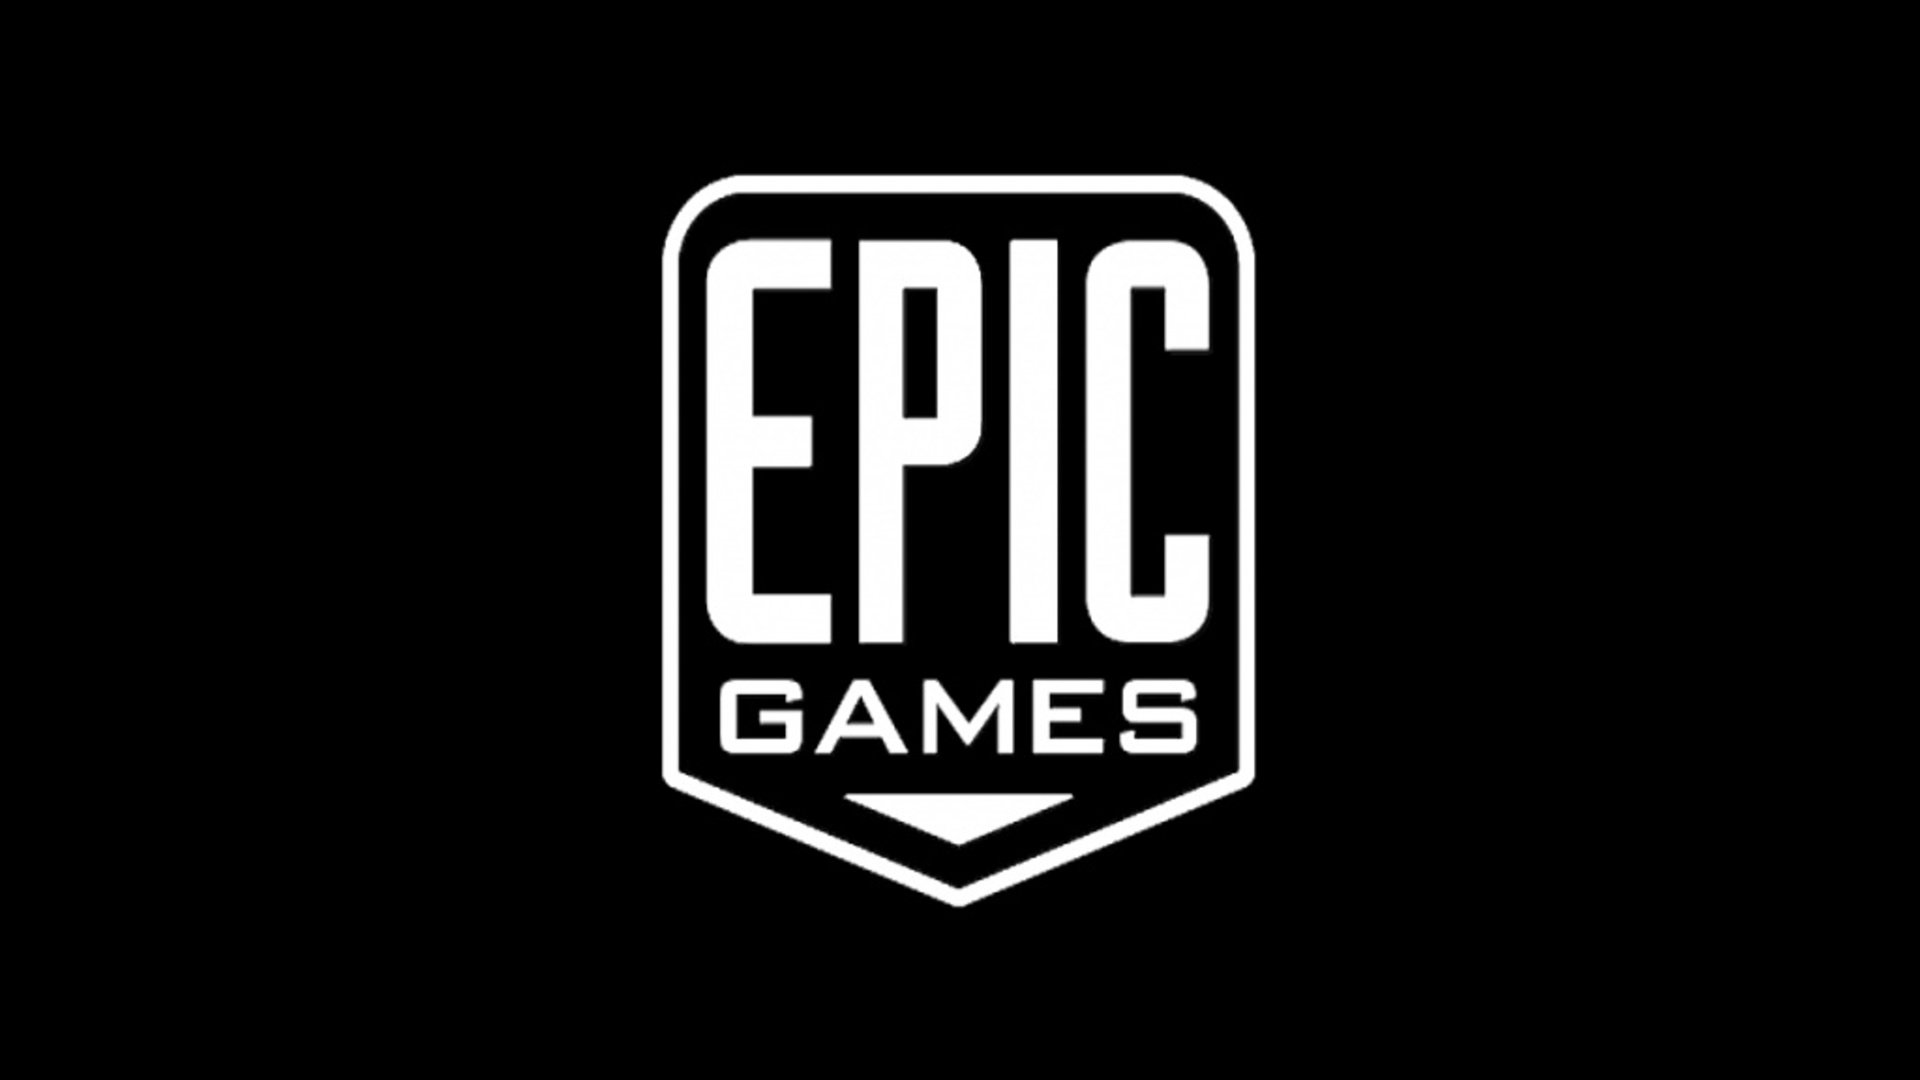 Epic Games has offered hundreds of recruited testers full-time jobs